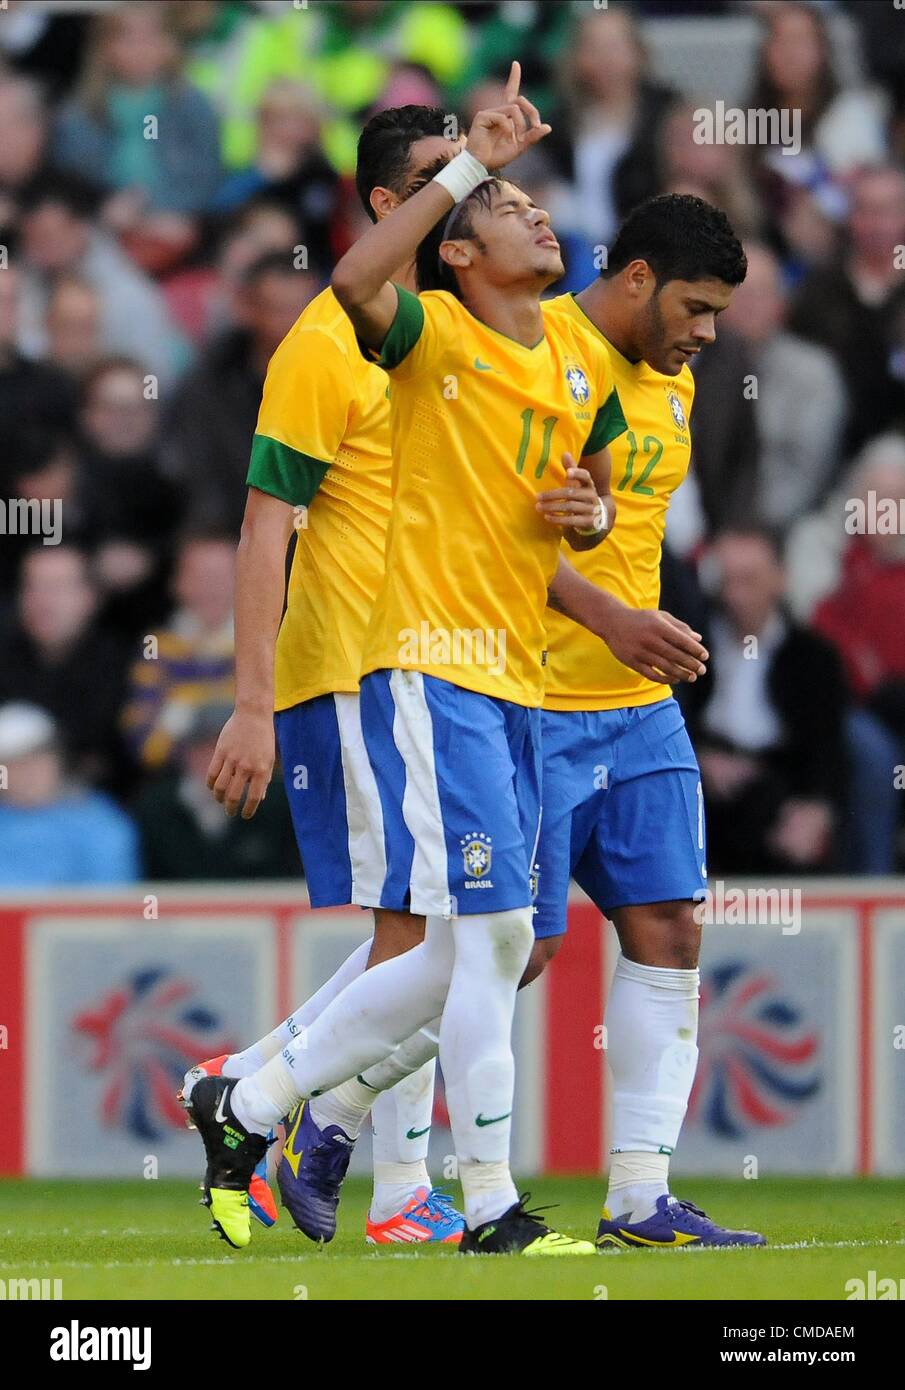 NEYMAR & HULK GREAT BRITAIN V BRAZIL GREAT BRITAIN V BRAZIL RIVERSIDE STADIUM, MIDDLESBROUGH, ENGLAND 20 July 2012 GAN54688    WARNING! This Photograph May Only Be Used For Newspaper And/Or Magazine Editorial Purposes. May Not Be Used For Publications Involving 1 player, 1 Club Or 1 Competition  Without Written Authorisation From Football DataCo Ltd. For Any Queries, Please Contact Football DataCo Ltd on +44 (0) 207 864 9121 Stock Photo